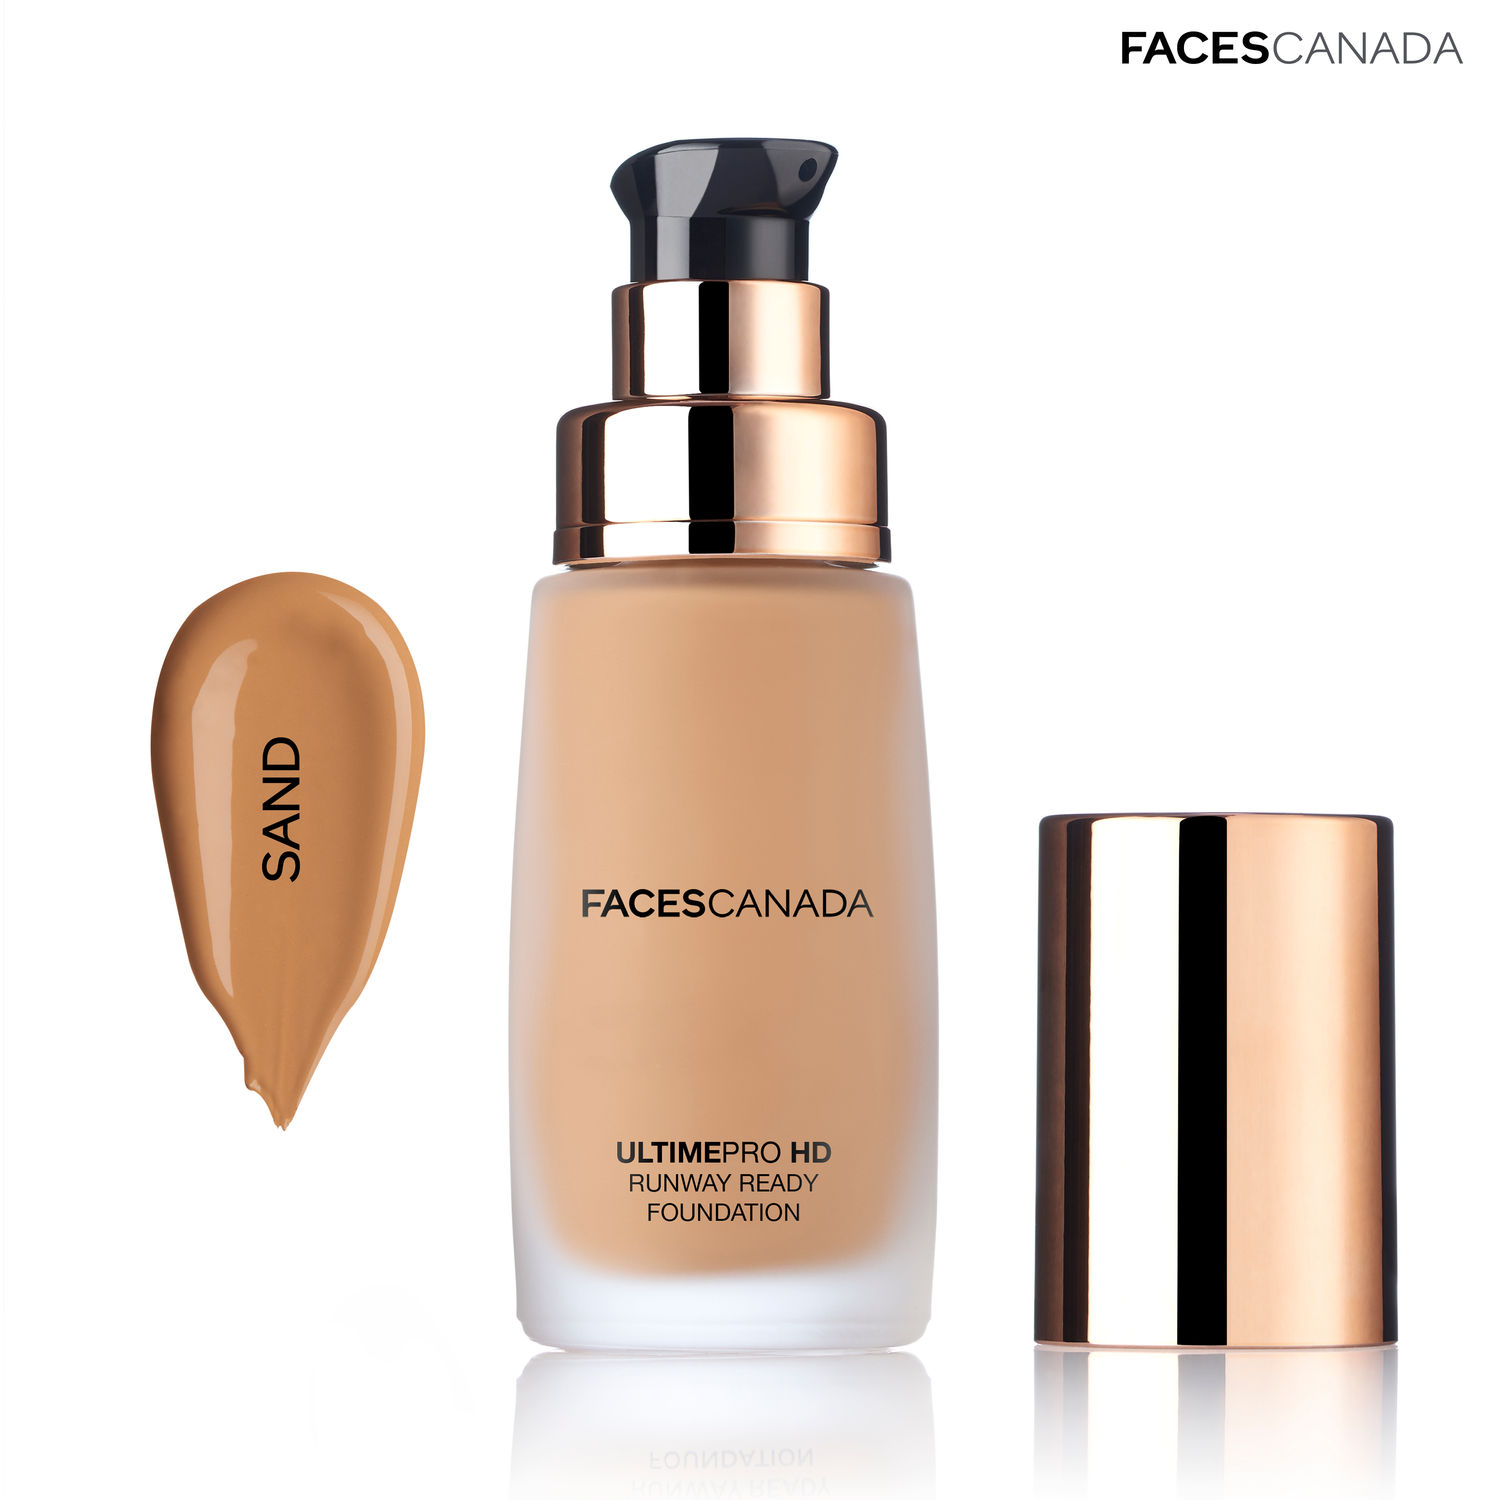 Buy FACES CANADA Ultime Pro HD Runway Ready Foundation - Sand, 30ml | Radiant Flawless Finish | HD High Coverage | Blends Easily | Longwear | Natural Dewy Skin - Purplle